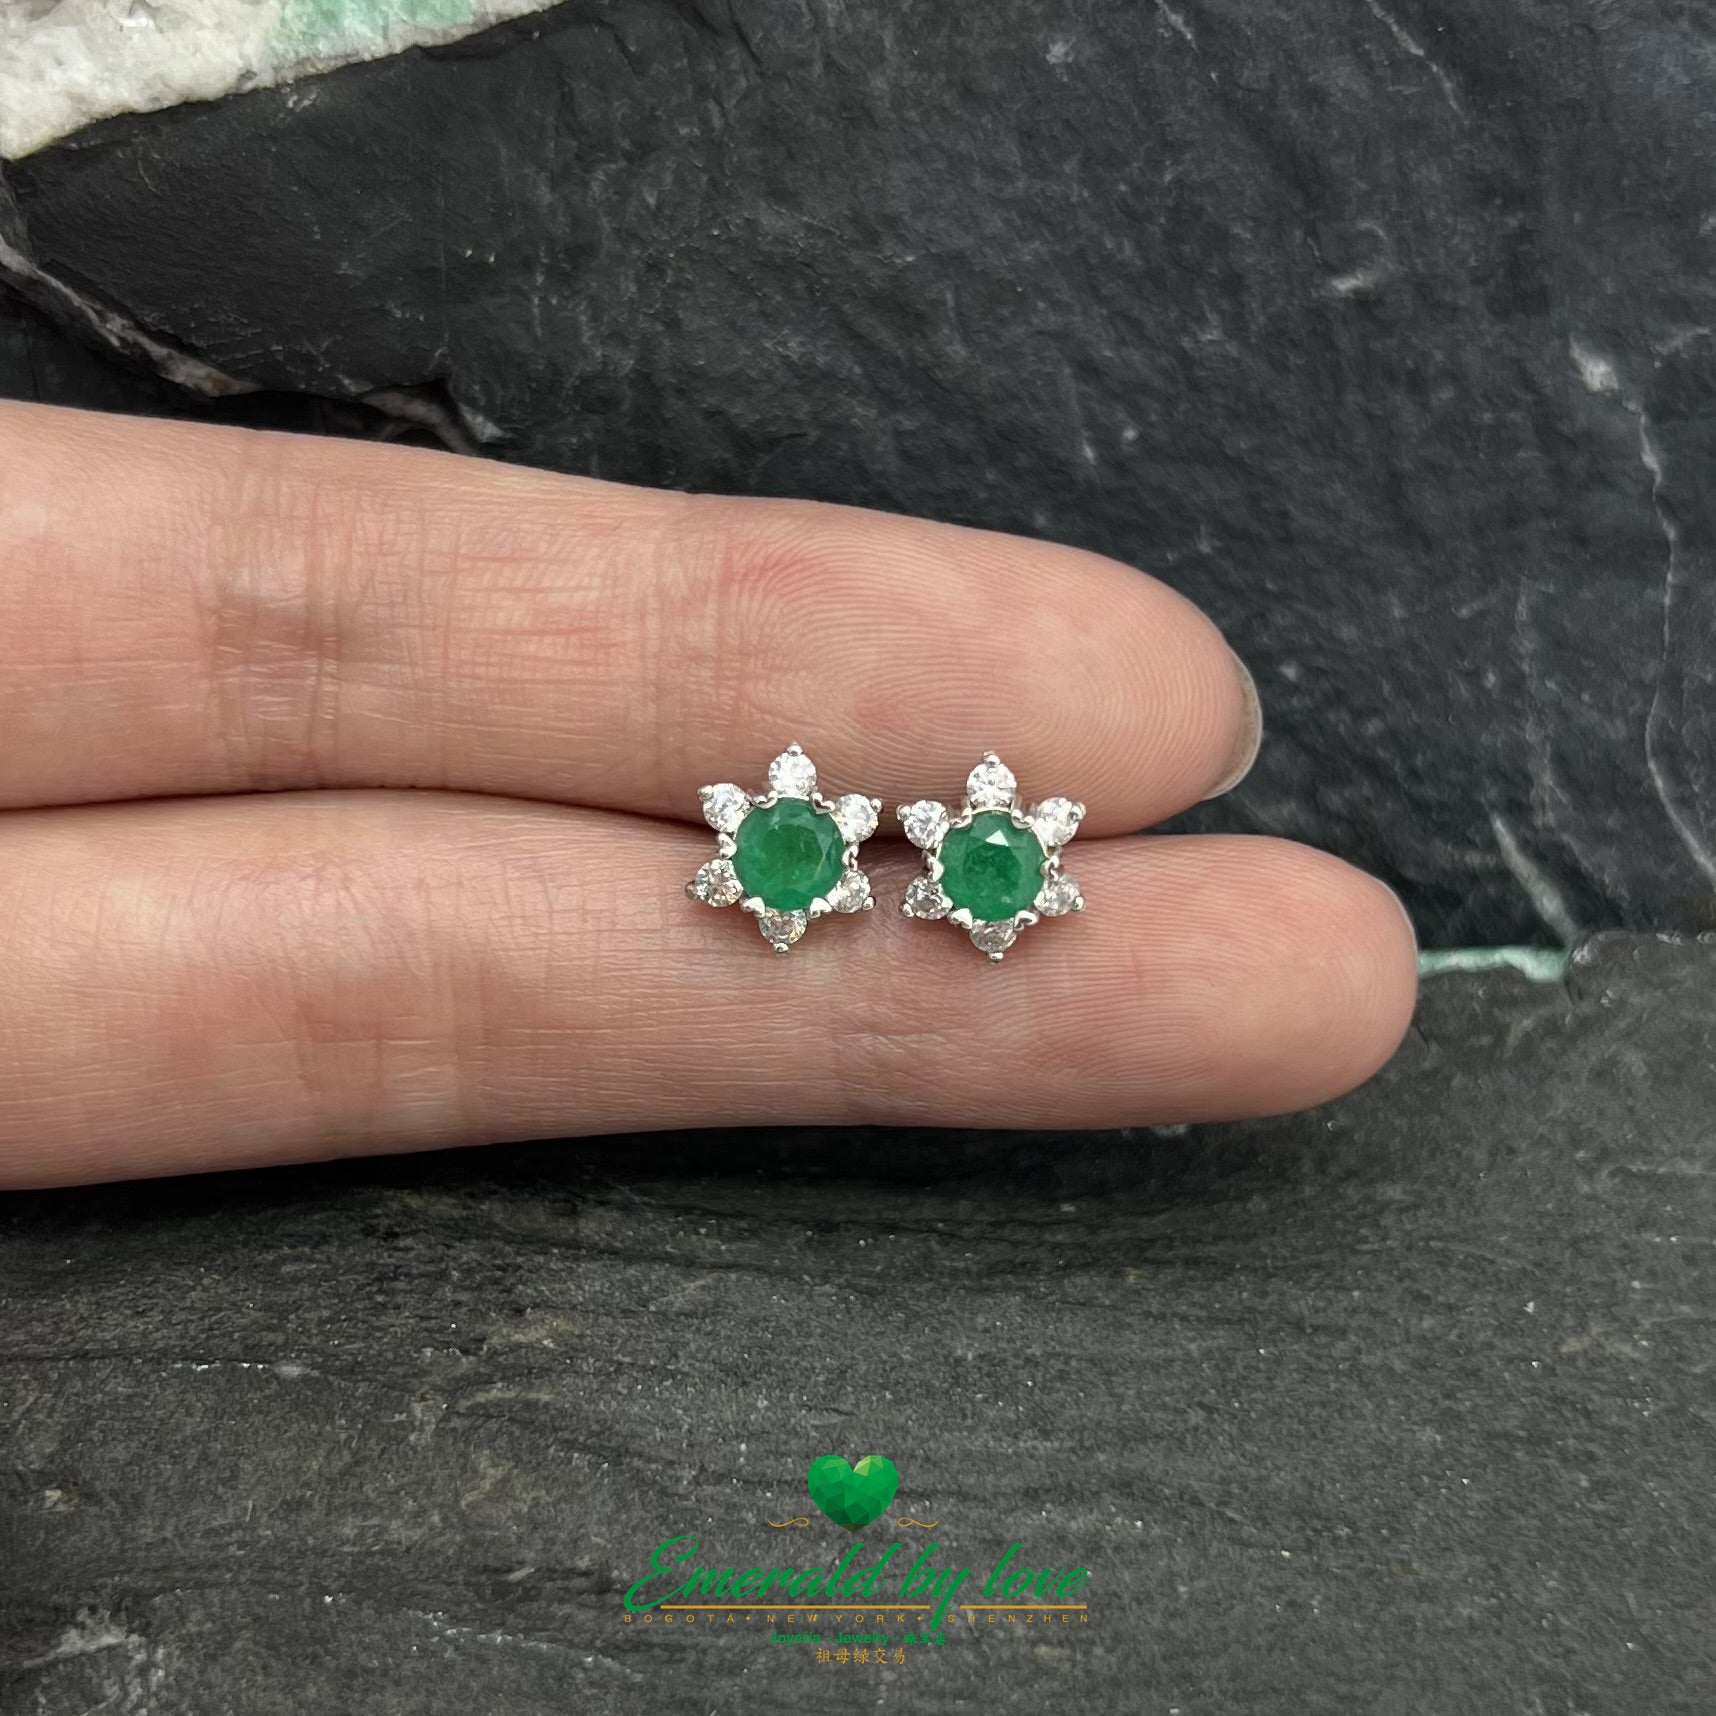 Six-Petal Silver Flower Earrings with Round Central Emerald